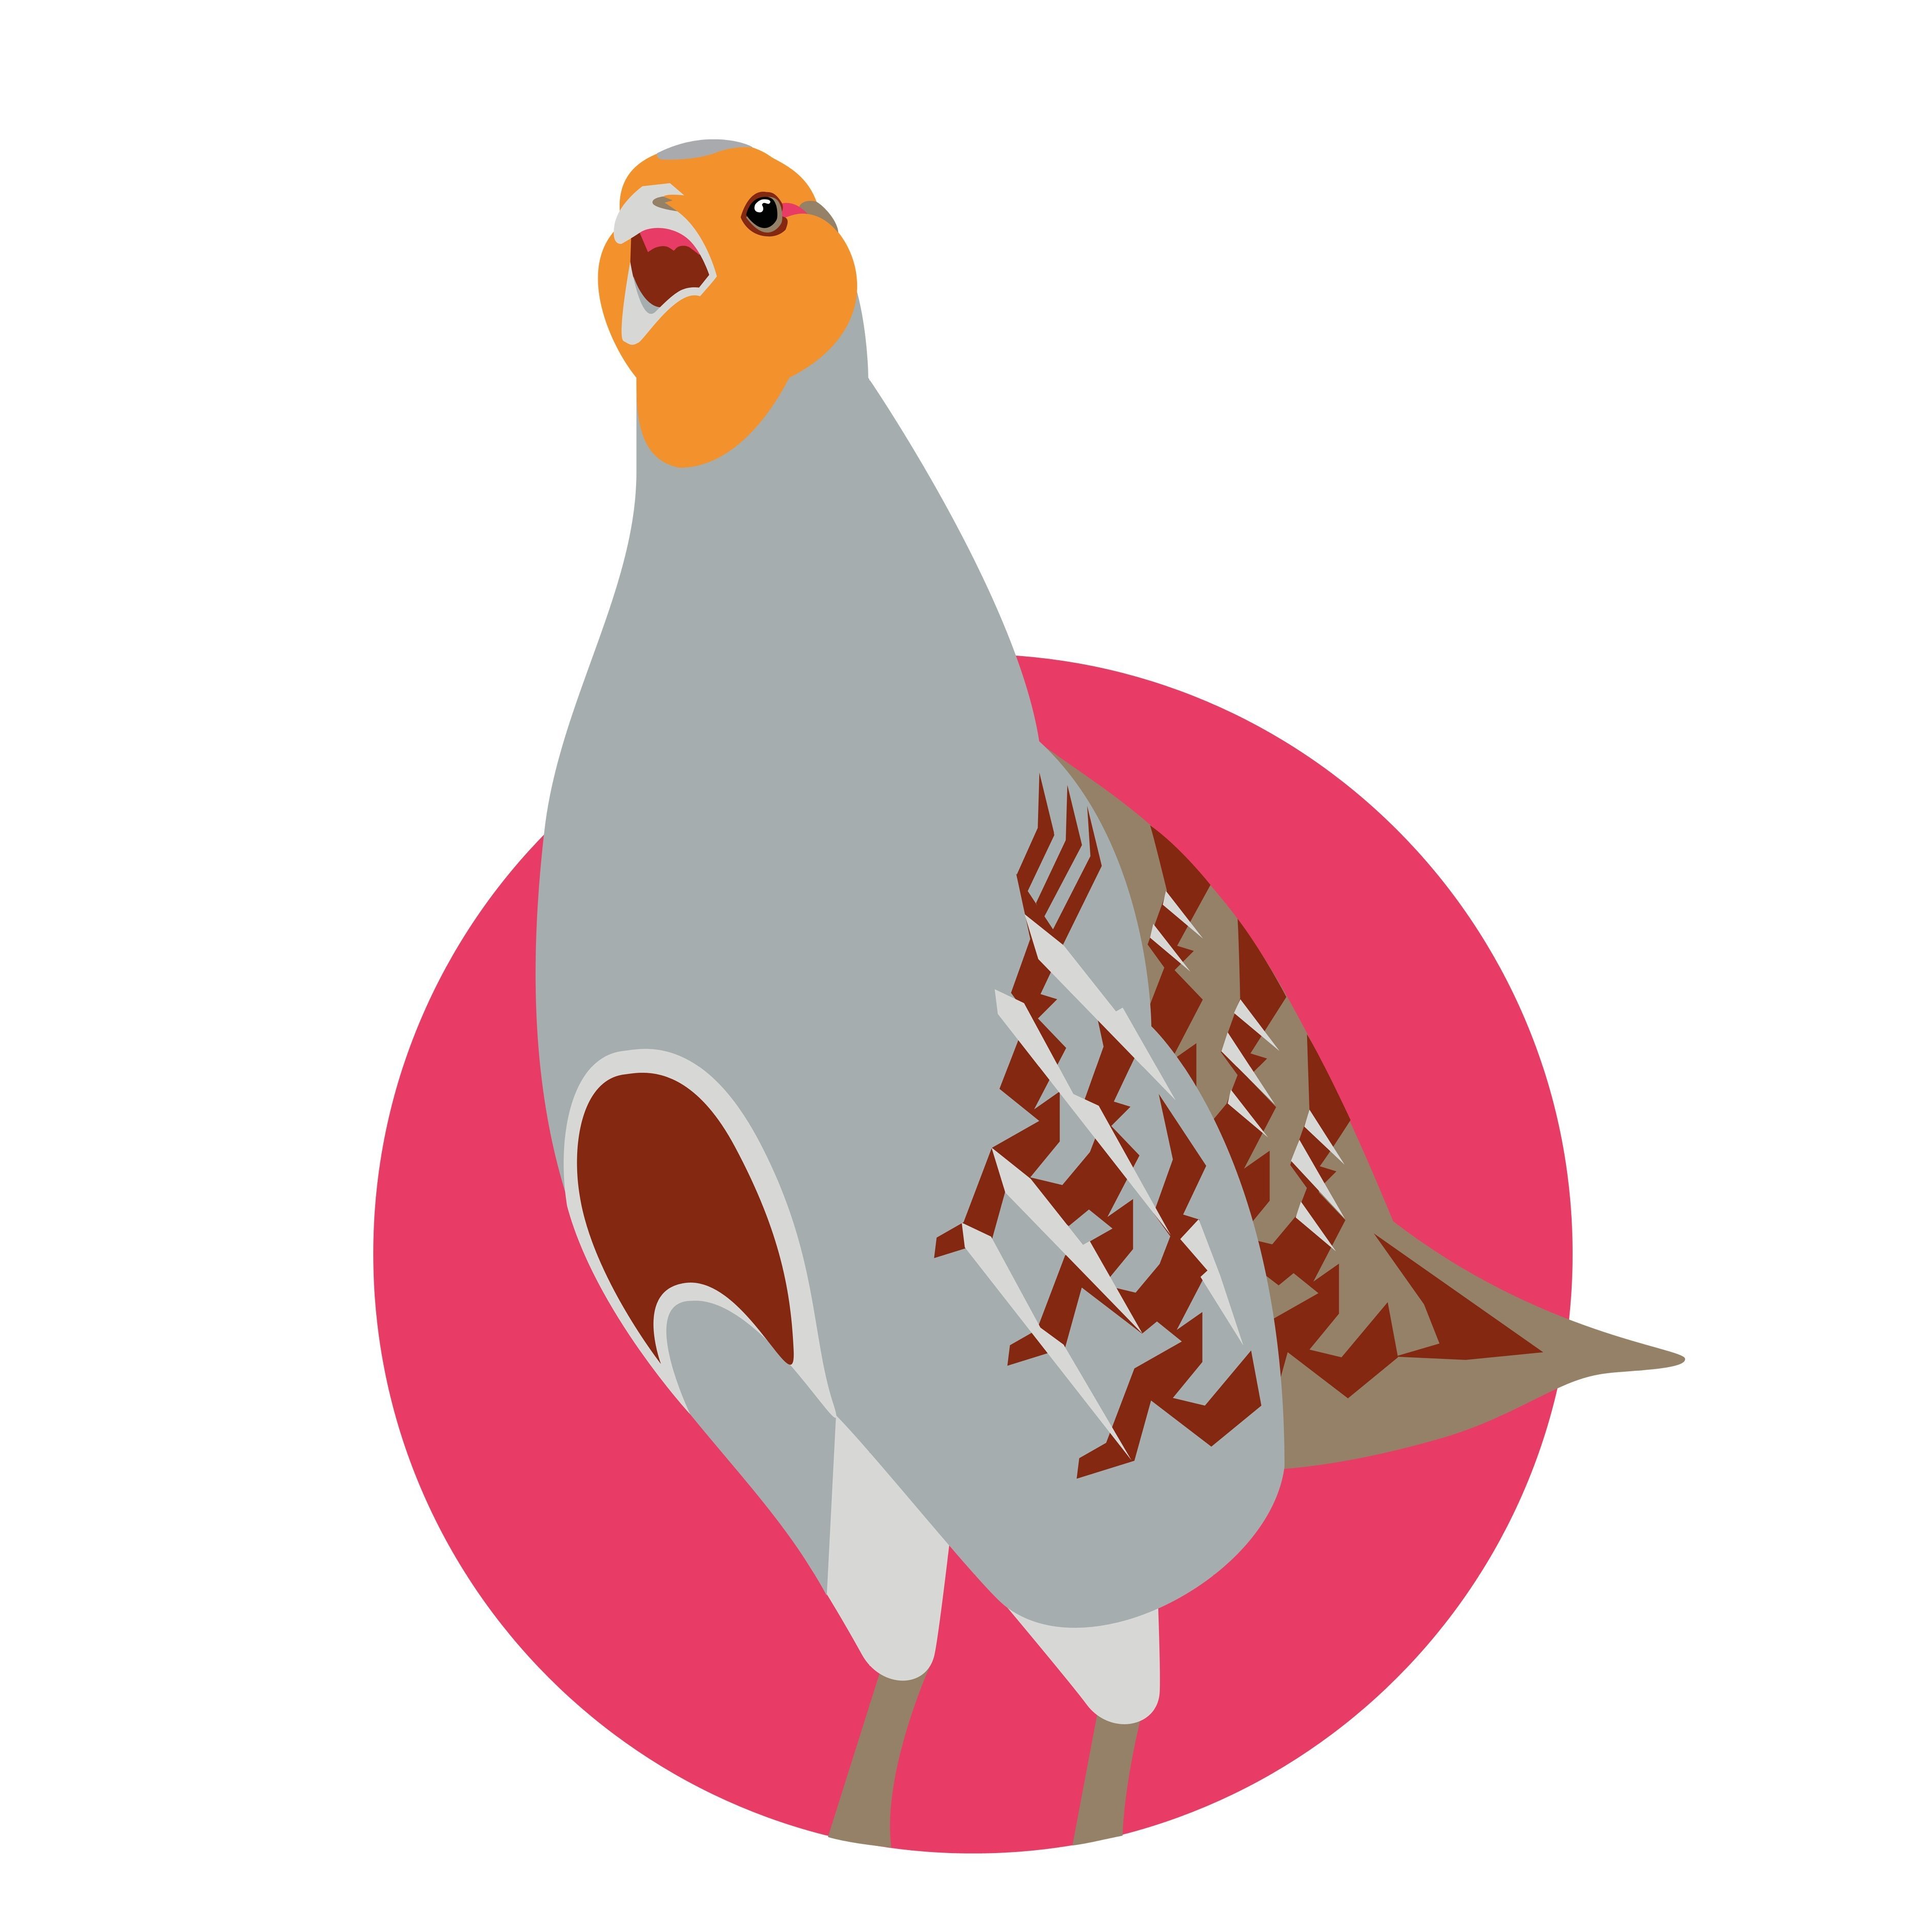 The PARTRIDGE international network provides a professional platform for any grey partridge & farmland biodiversity conservation enthusiast, manager & hunter.